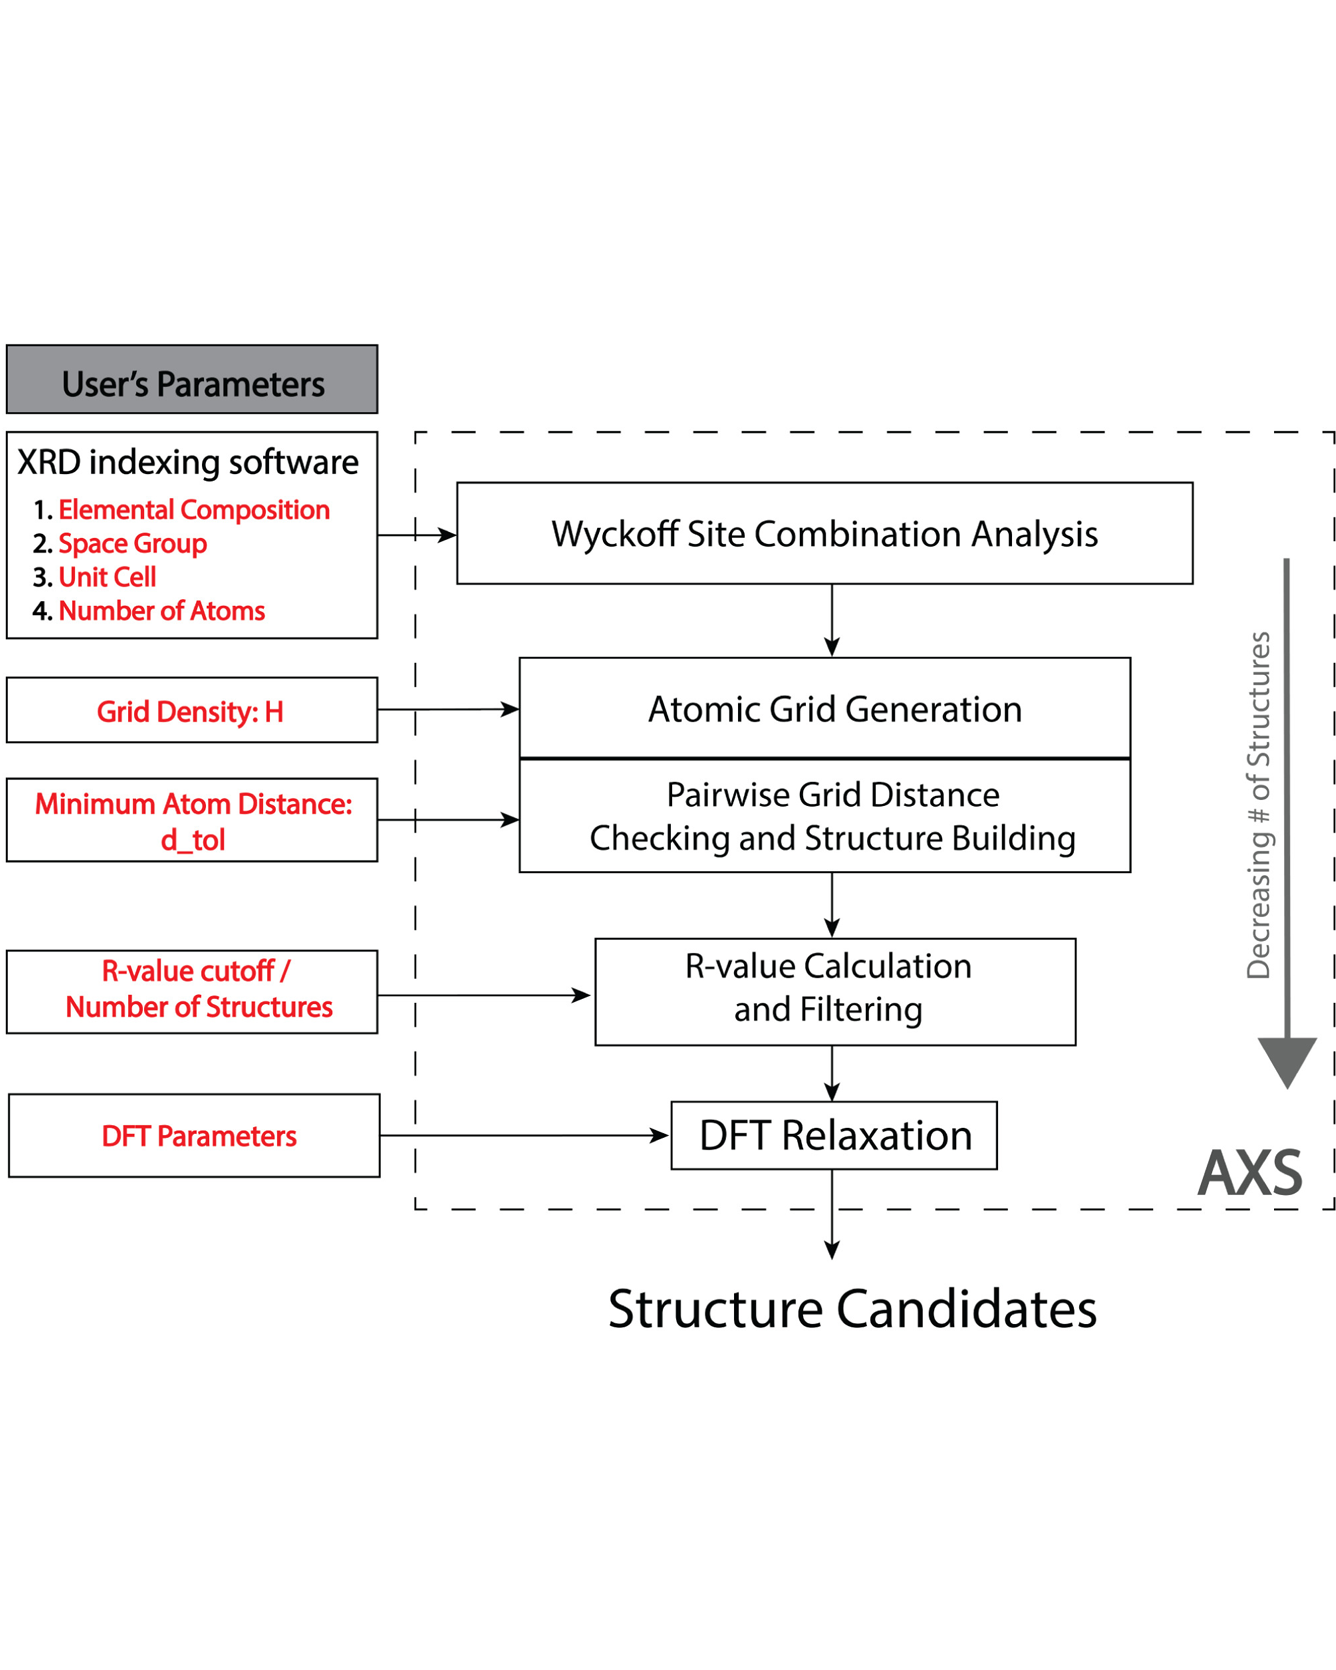 Structure Candidates image